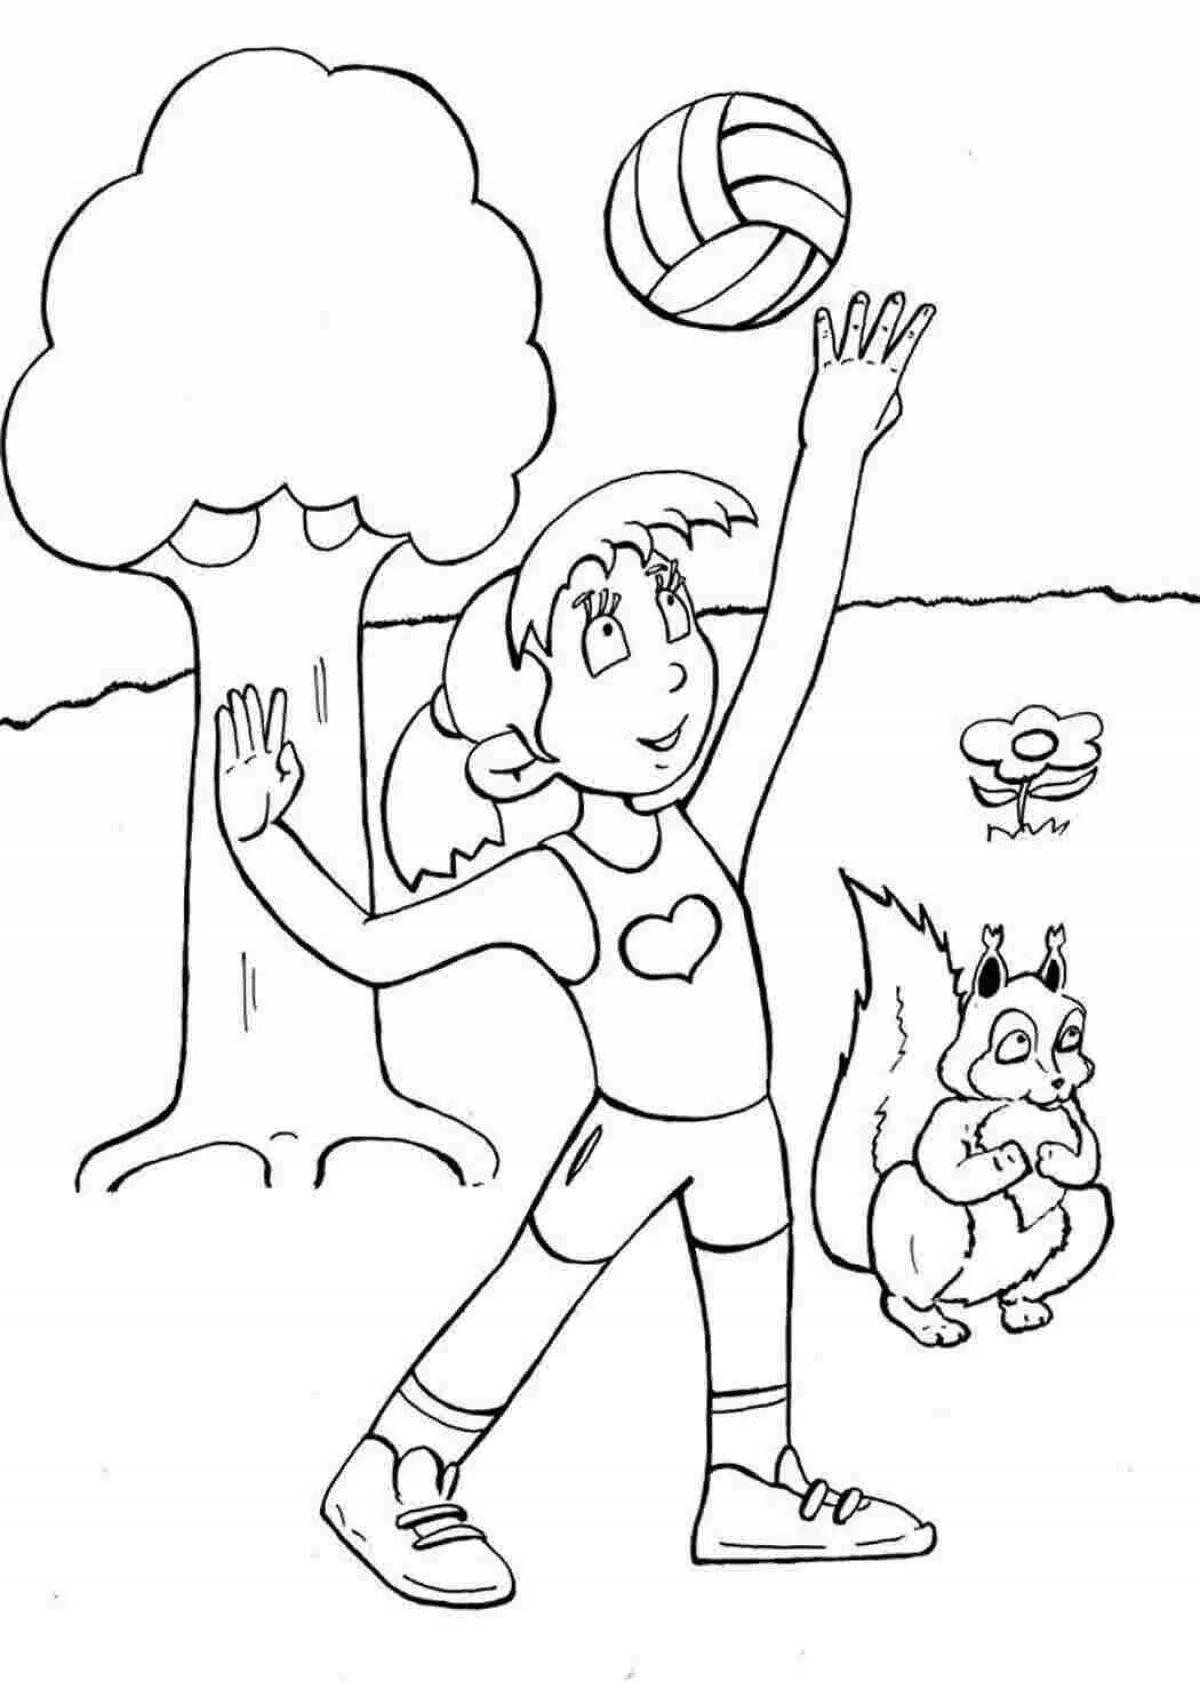 Fun coloring book health and sports